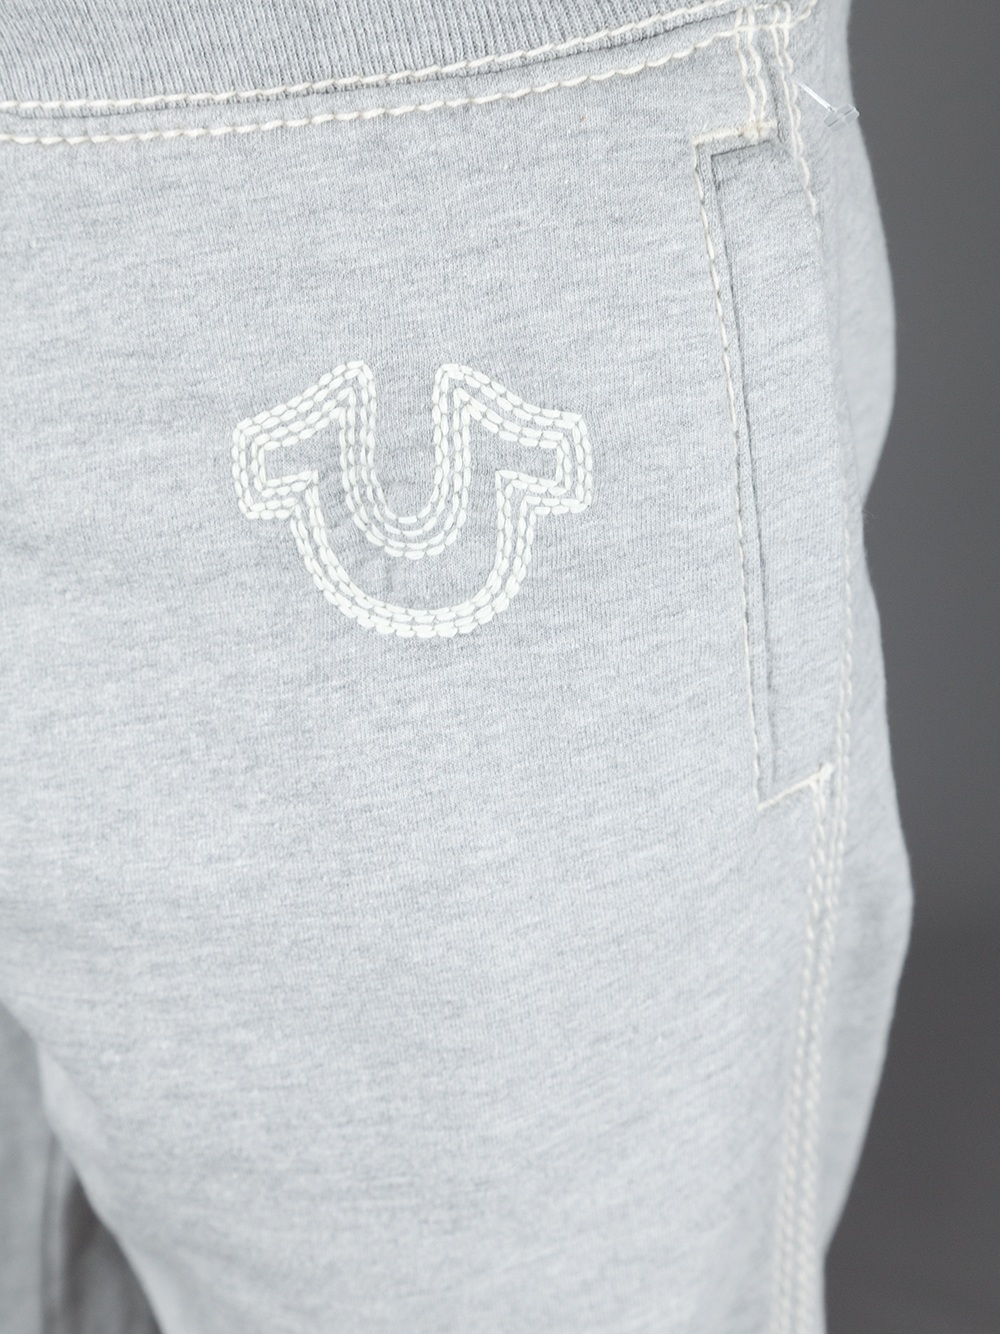 true religion sweat outfit